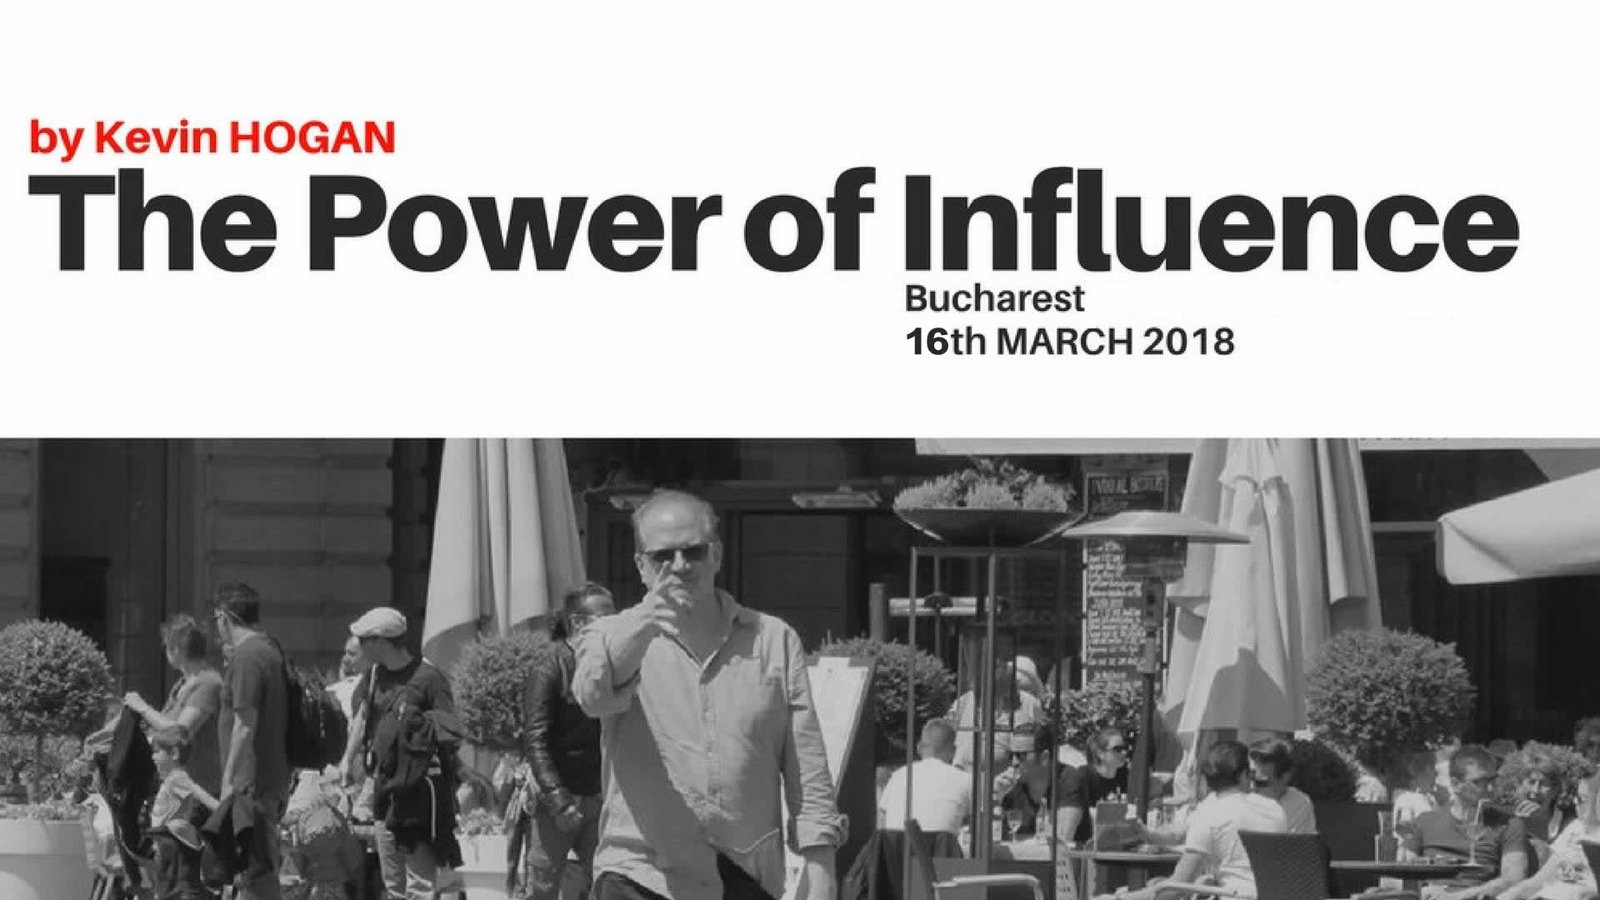 The Power of Influence - Dr. Kevin Hogan - Bucharest 16 March 2018